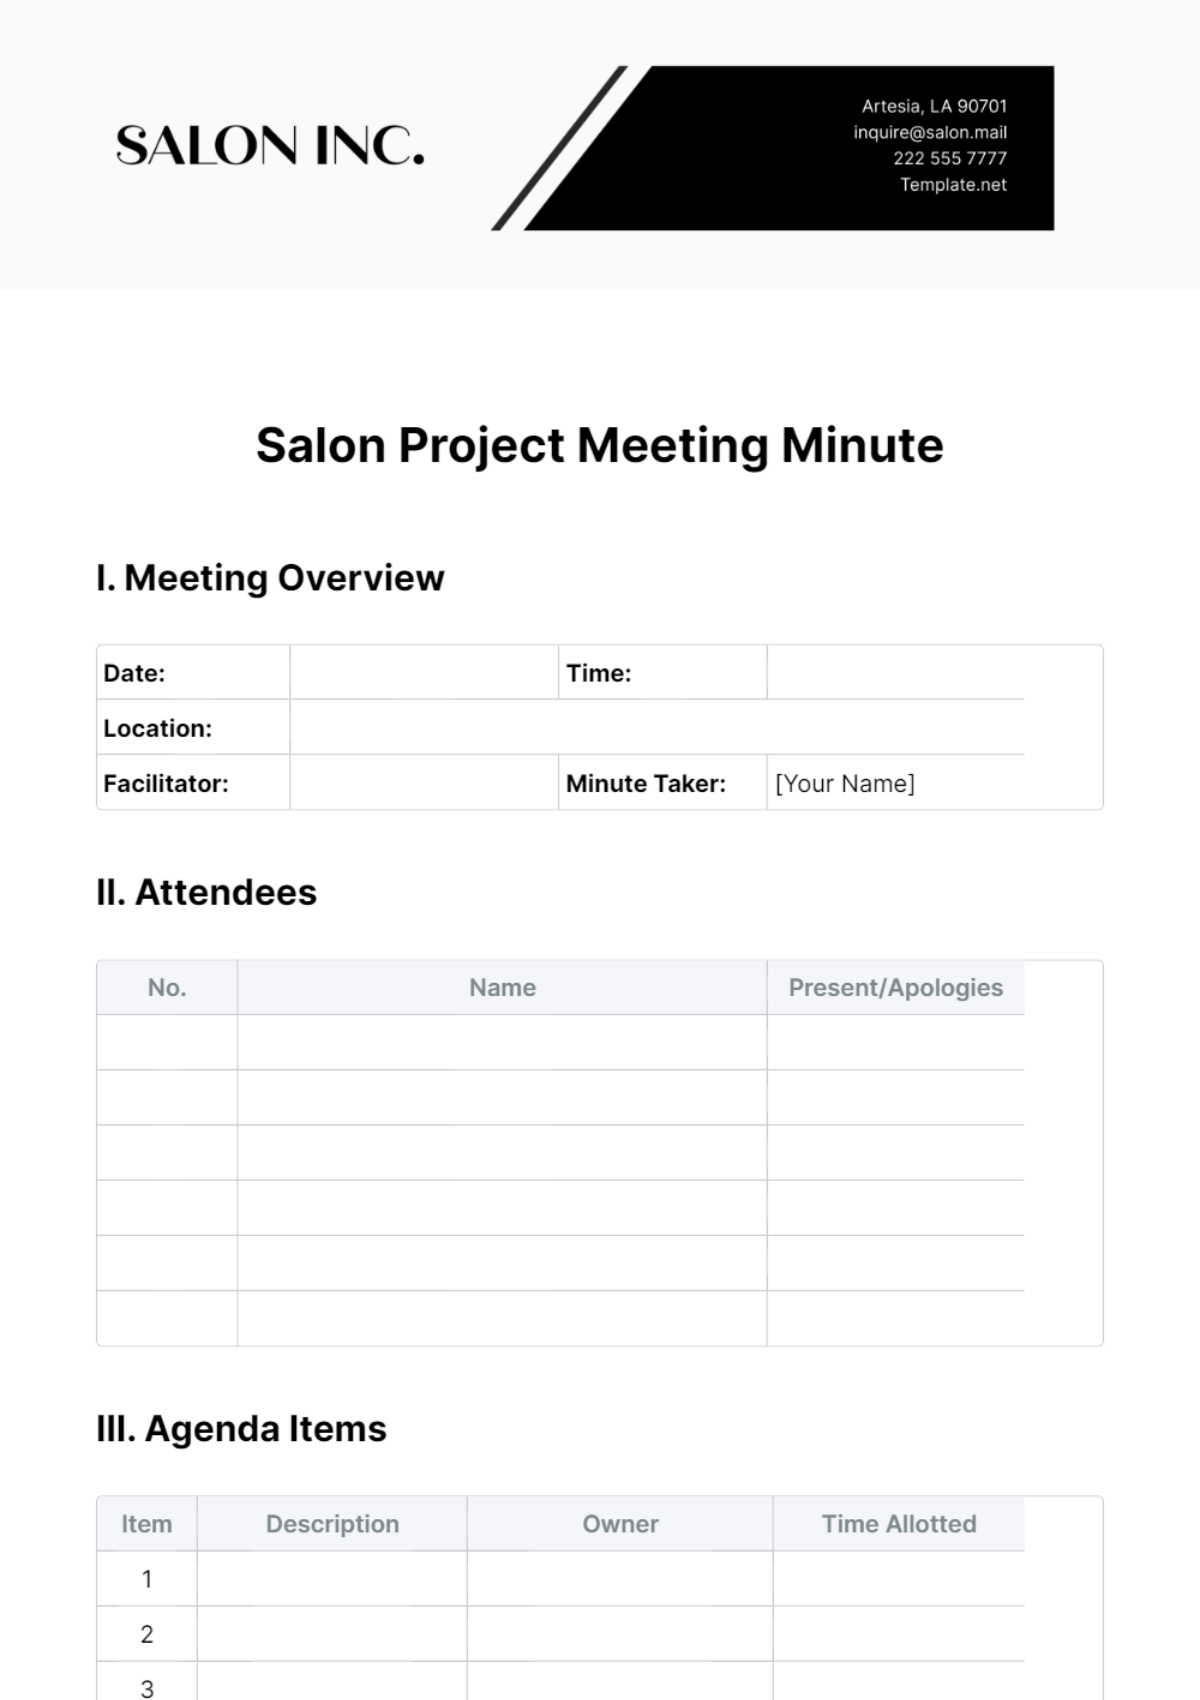 Free Salon Project Meeting Minute Template